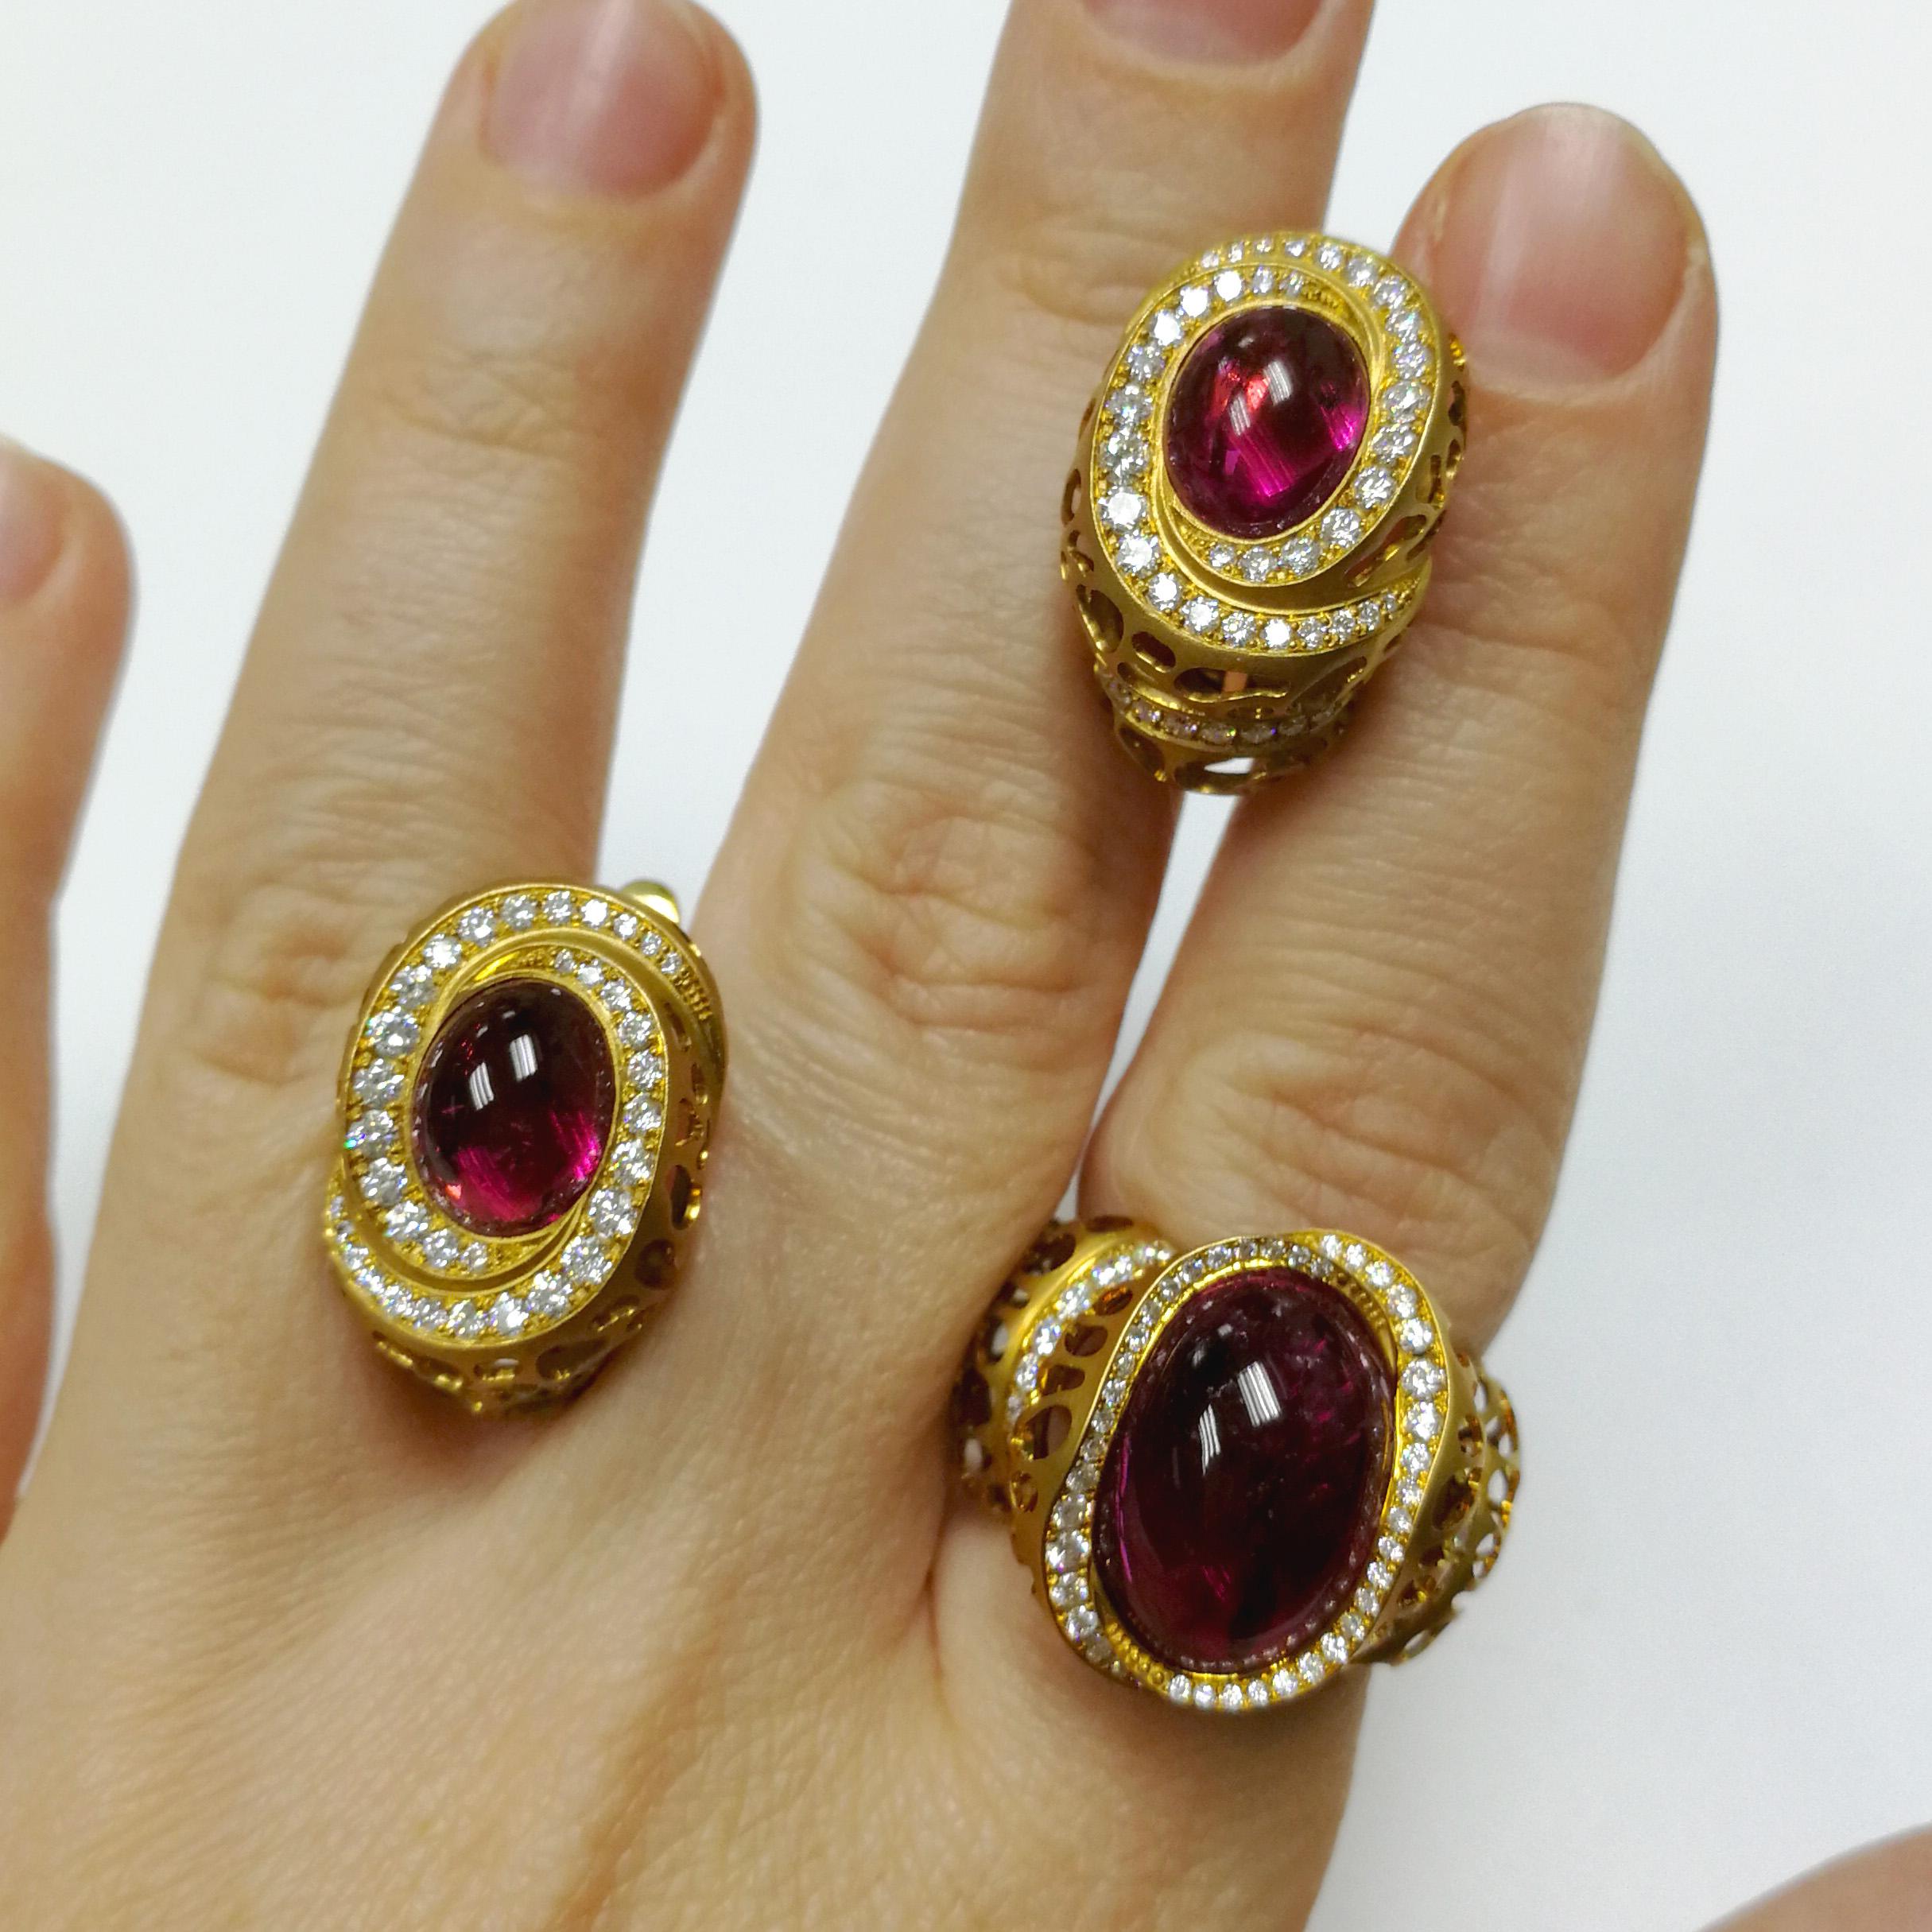 Rubellite Diamonds 18 Karat Yellow Gold Coral Reef Suite
Suite from the Coral Reef collection, where the distinctive feature is the shape of 18 Karat Yellow Gold, made in the form of coral reefs. The variety of colors in this Сollection is